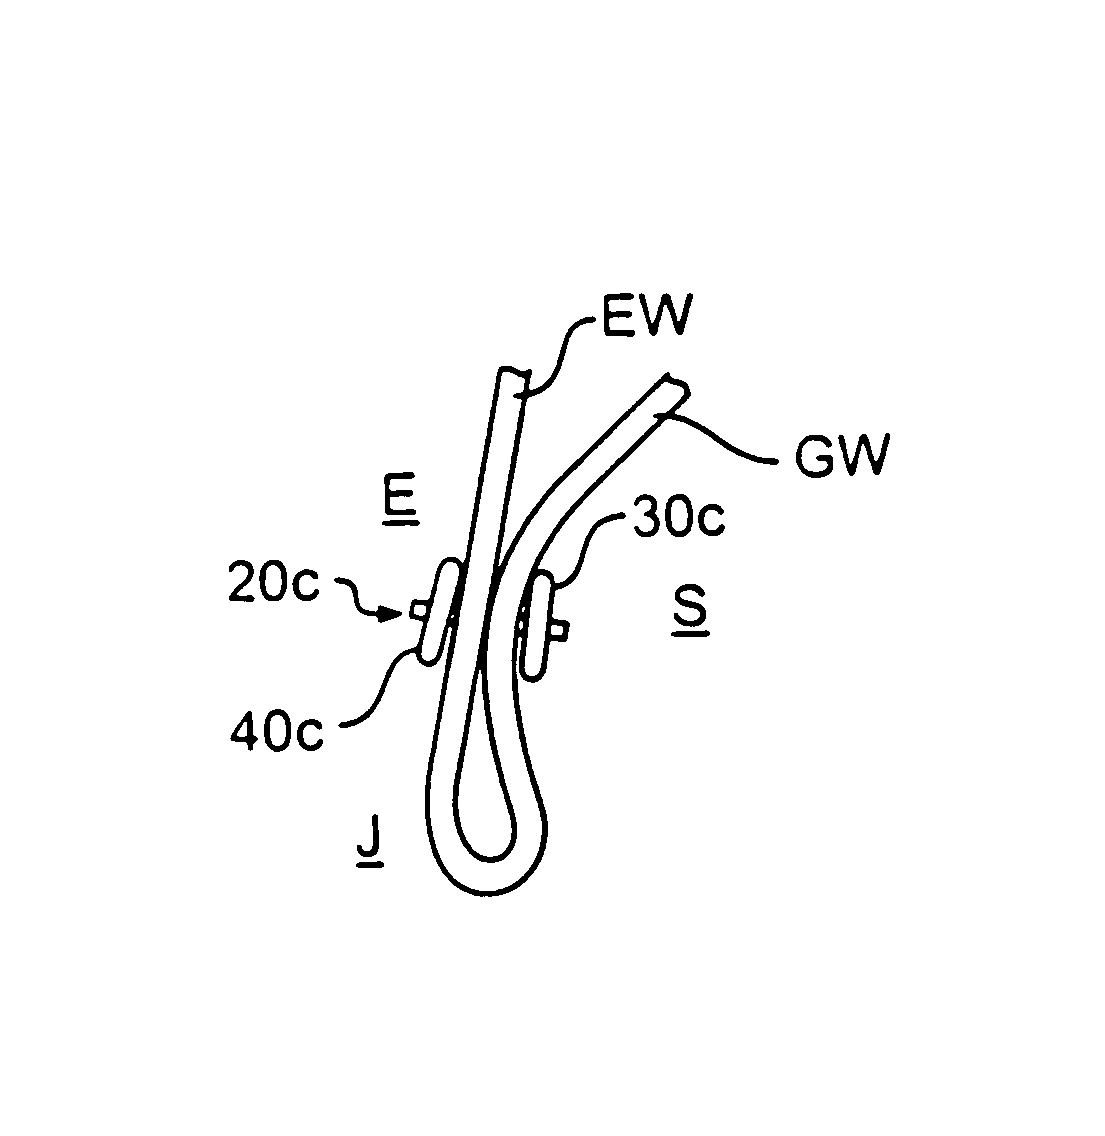 Implantable tissue fastener and system for treating gastroesophageal reflux disease